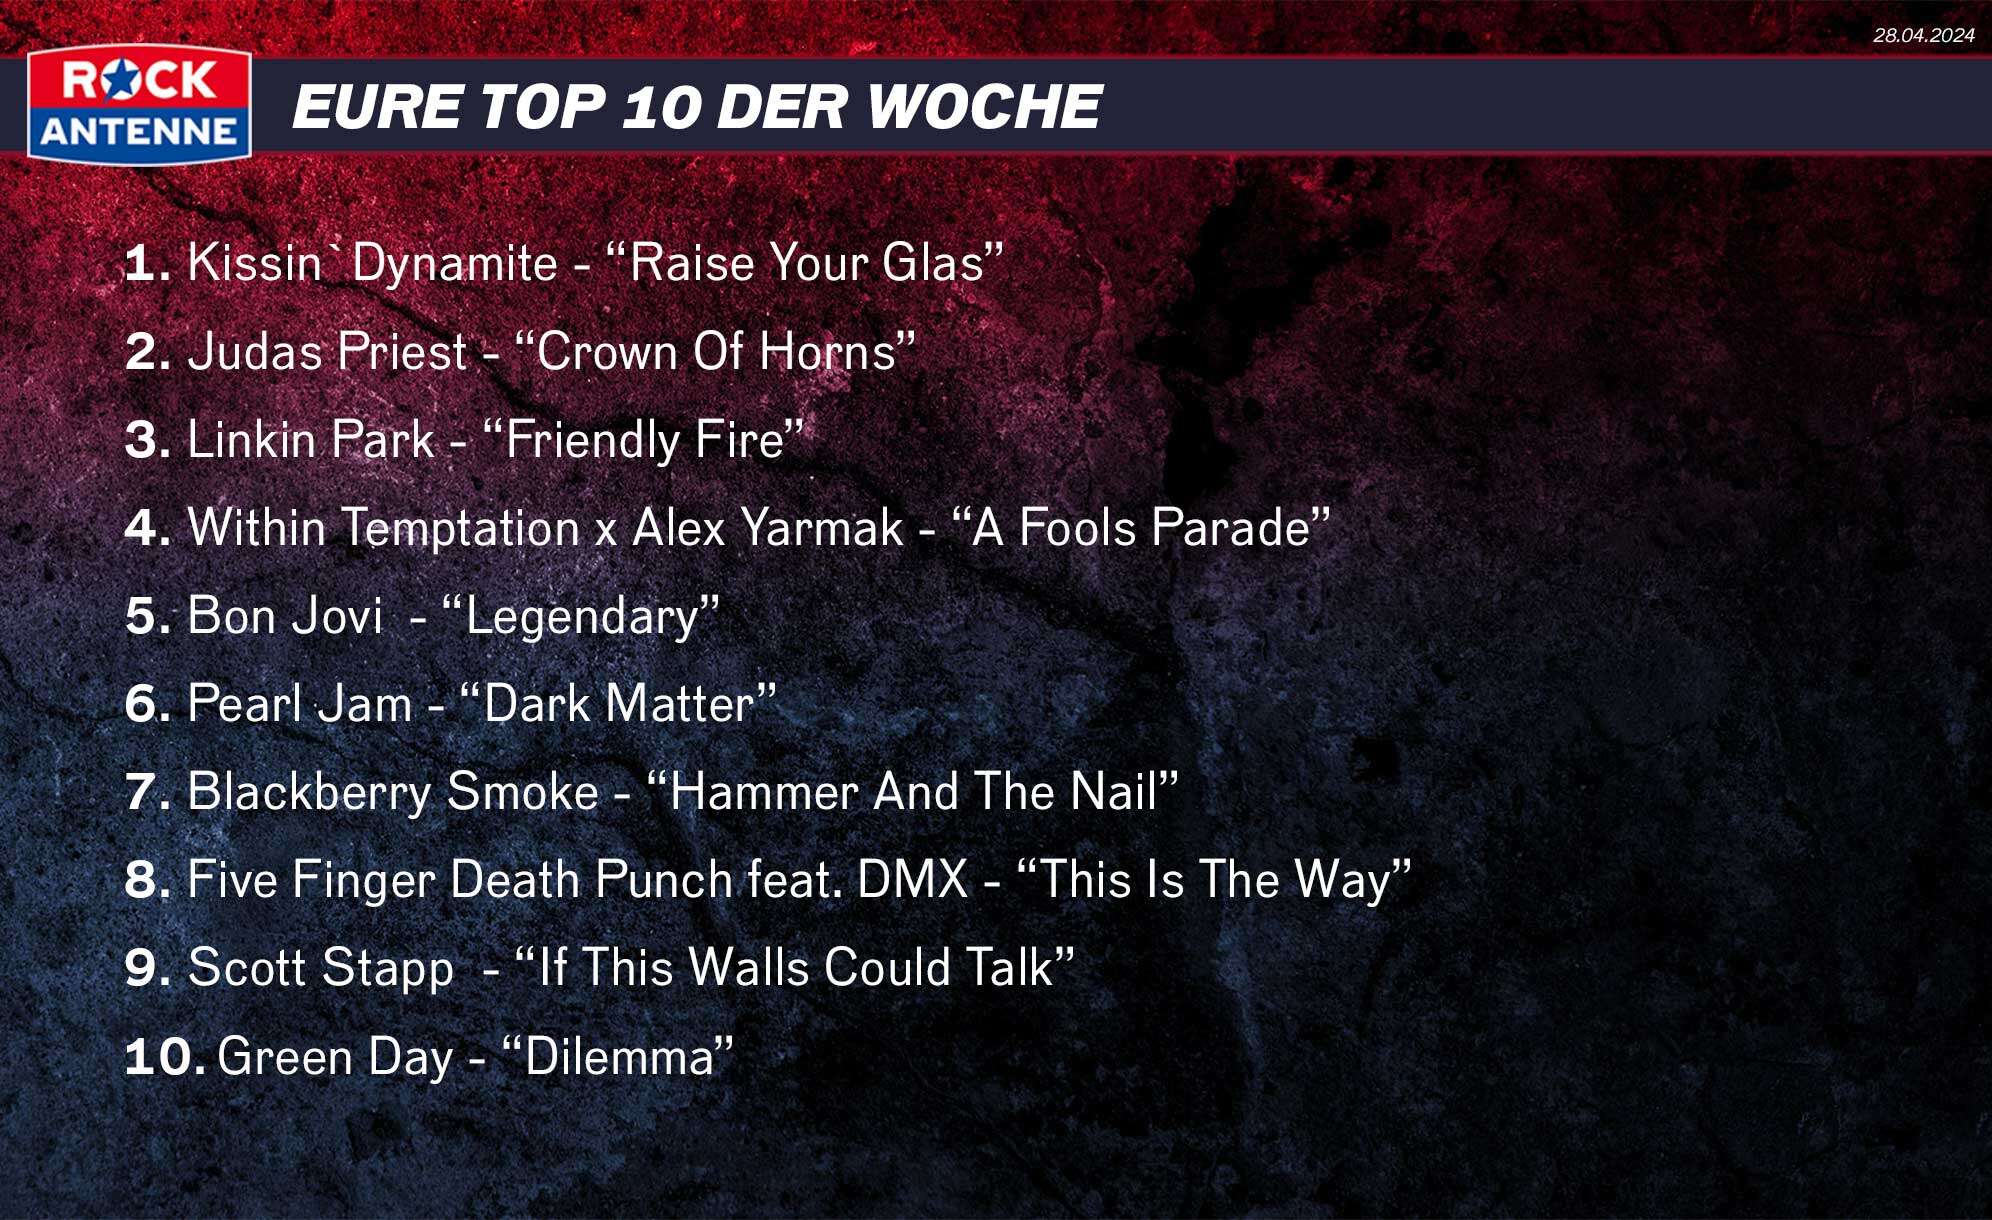 Top Ten der Woche vom 05.05.2024: 1. Kissin`Dynamite - “Raise Your Glas” 2. Judas Priest - “Crown Of Horns” 3. Linkin Park - “Friendly Fire” 4. Within Temptation x Alex Yarmak - “A Fools Parade” 5. Bon Jovi  - “Legendary” 6. Pearl Jam - “Dark Matter” 7. Blackberry Smoke - “Hammer And The Nail” 8. Five Finger Death Punch feat. DMX - “This Is The Way” 9. Scott Stapp  - “If This Walls Could Talk” 10. Green Day - “Dilemma”